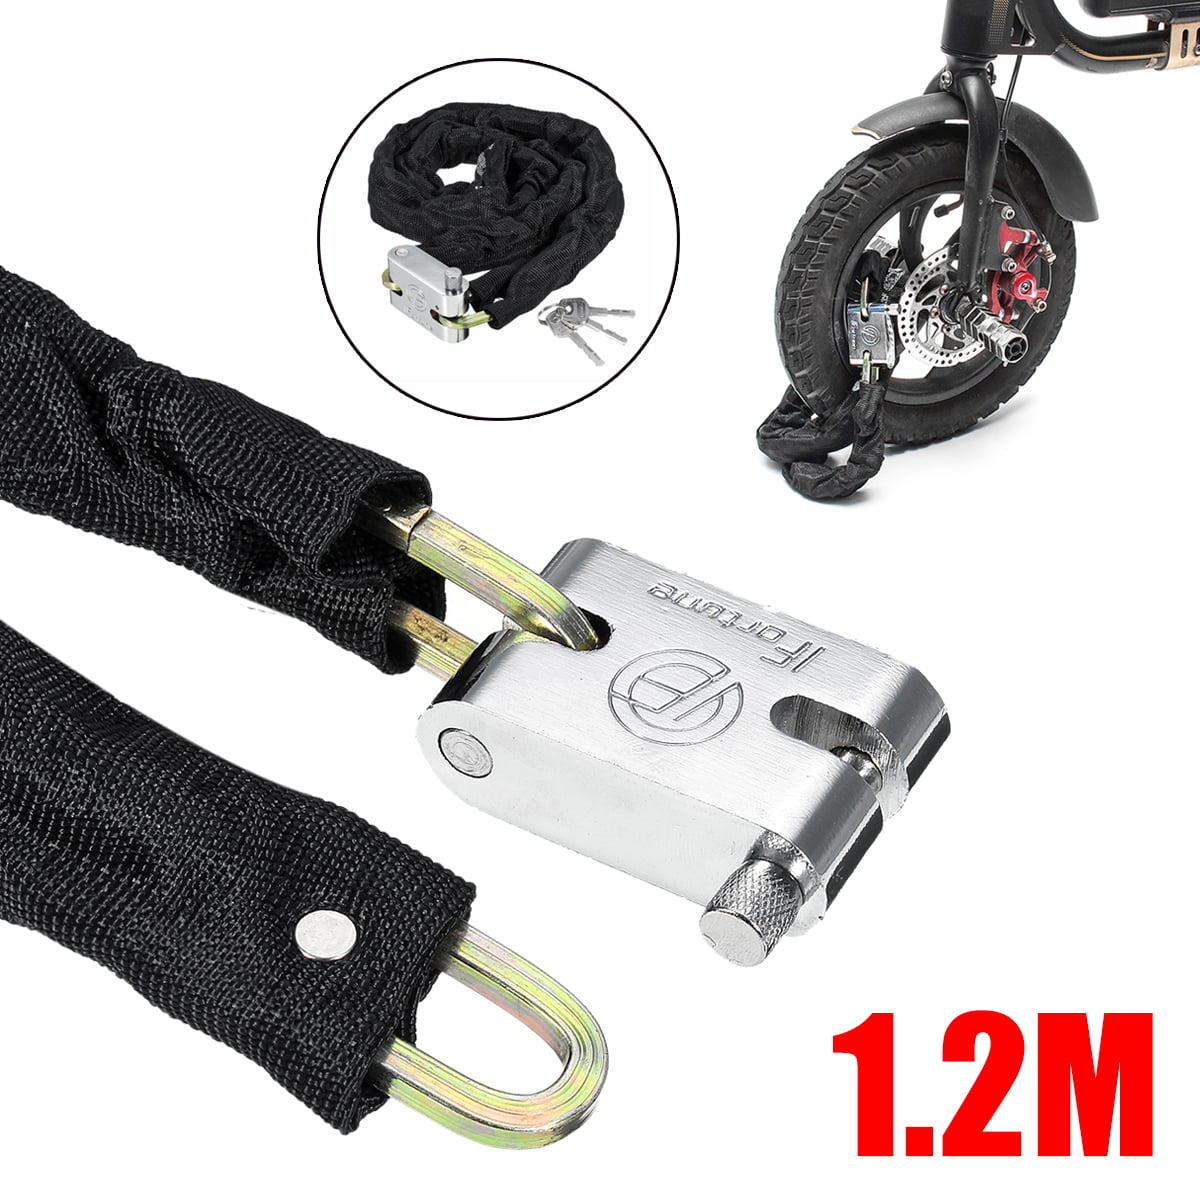 HEAVY DUTY STRONG MOTORCYCLE MOTORBIKE BIKE SECURITY CHAIN AND PADLOCK LOCK 